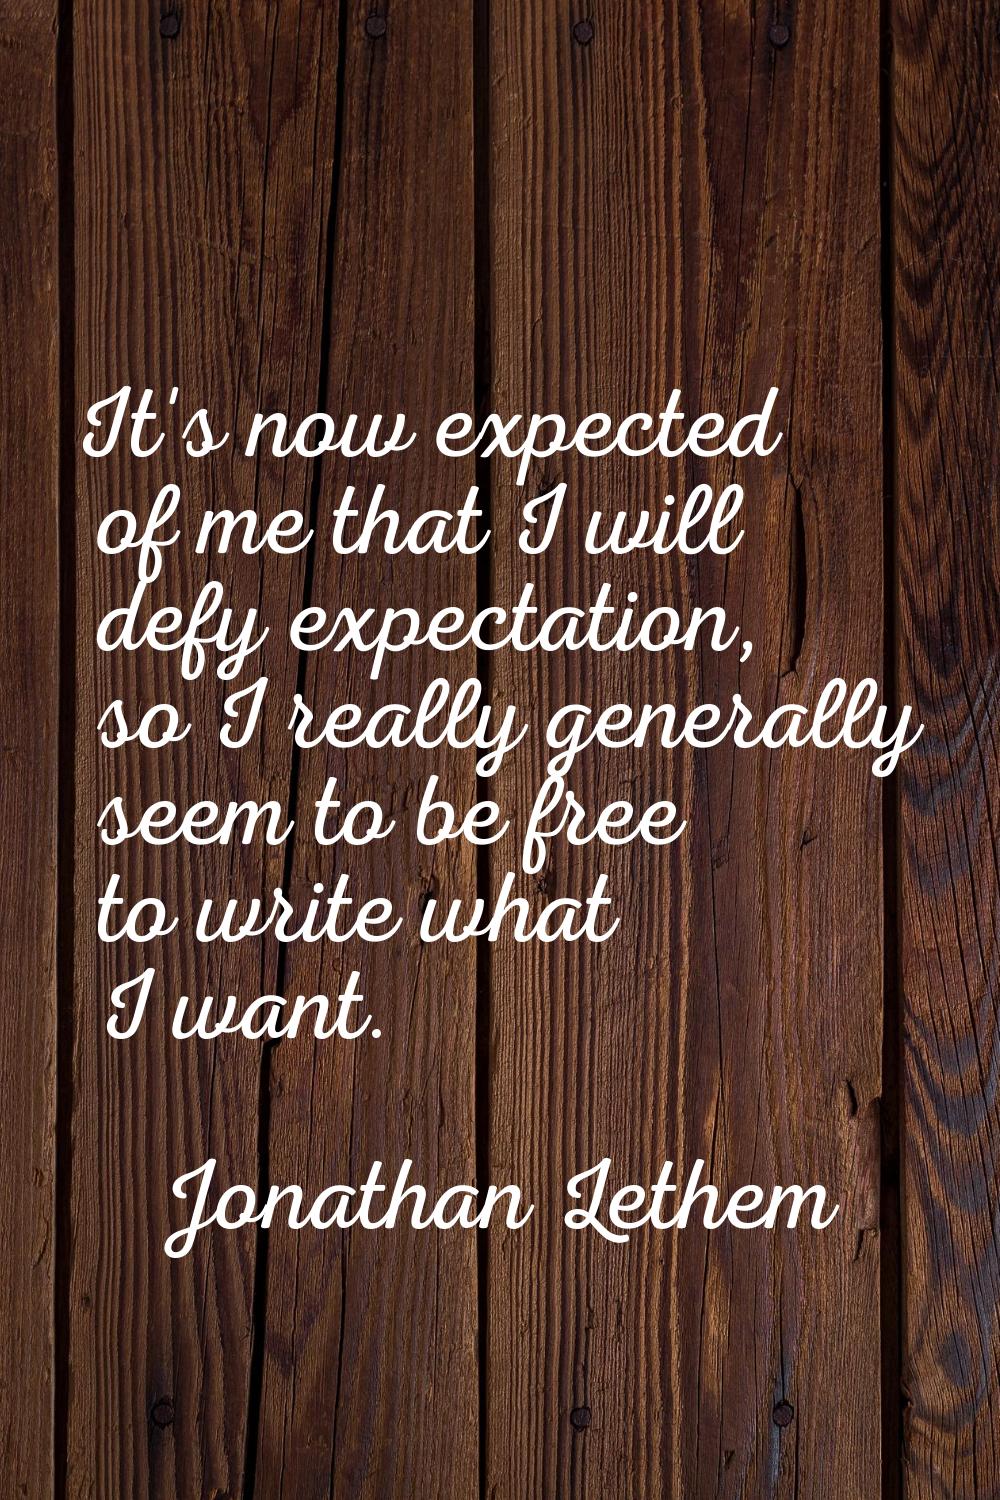 It's now expected of me that I will defy expectation, so I really generally seem to be free to writ